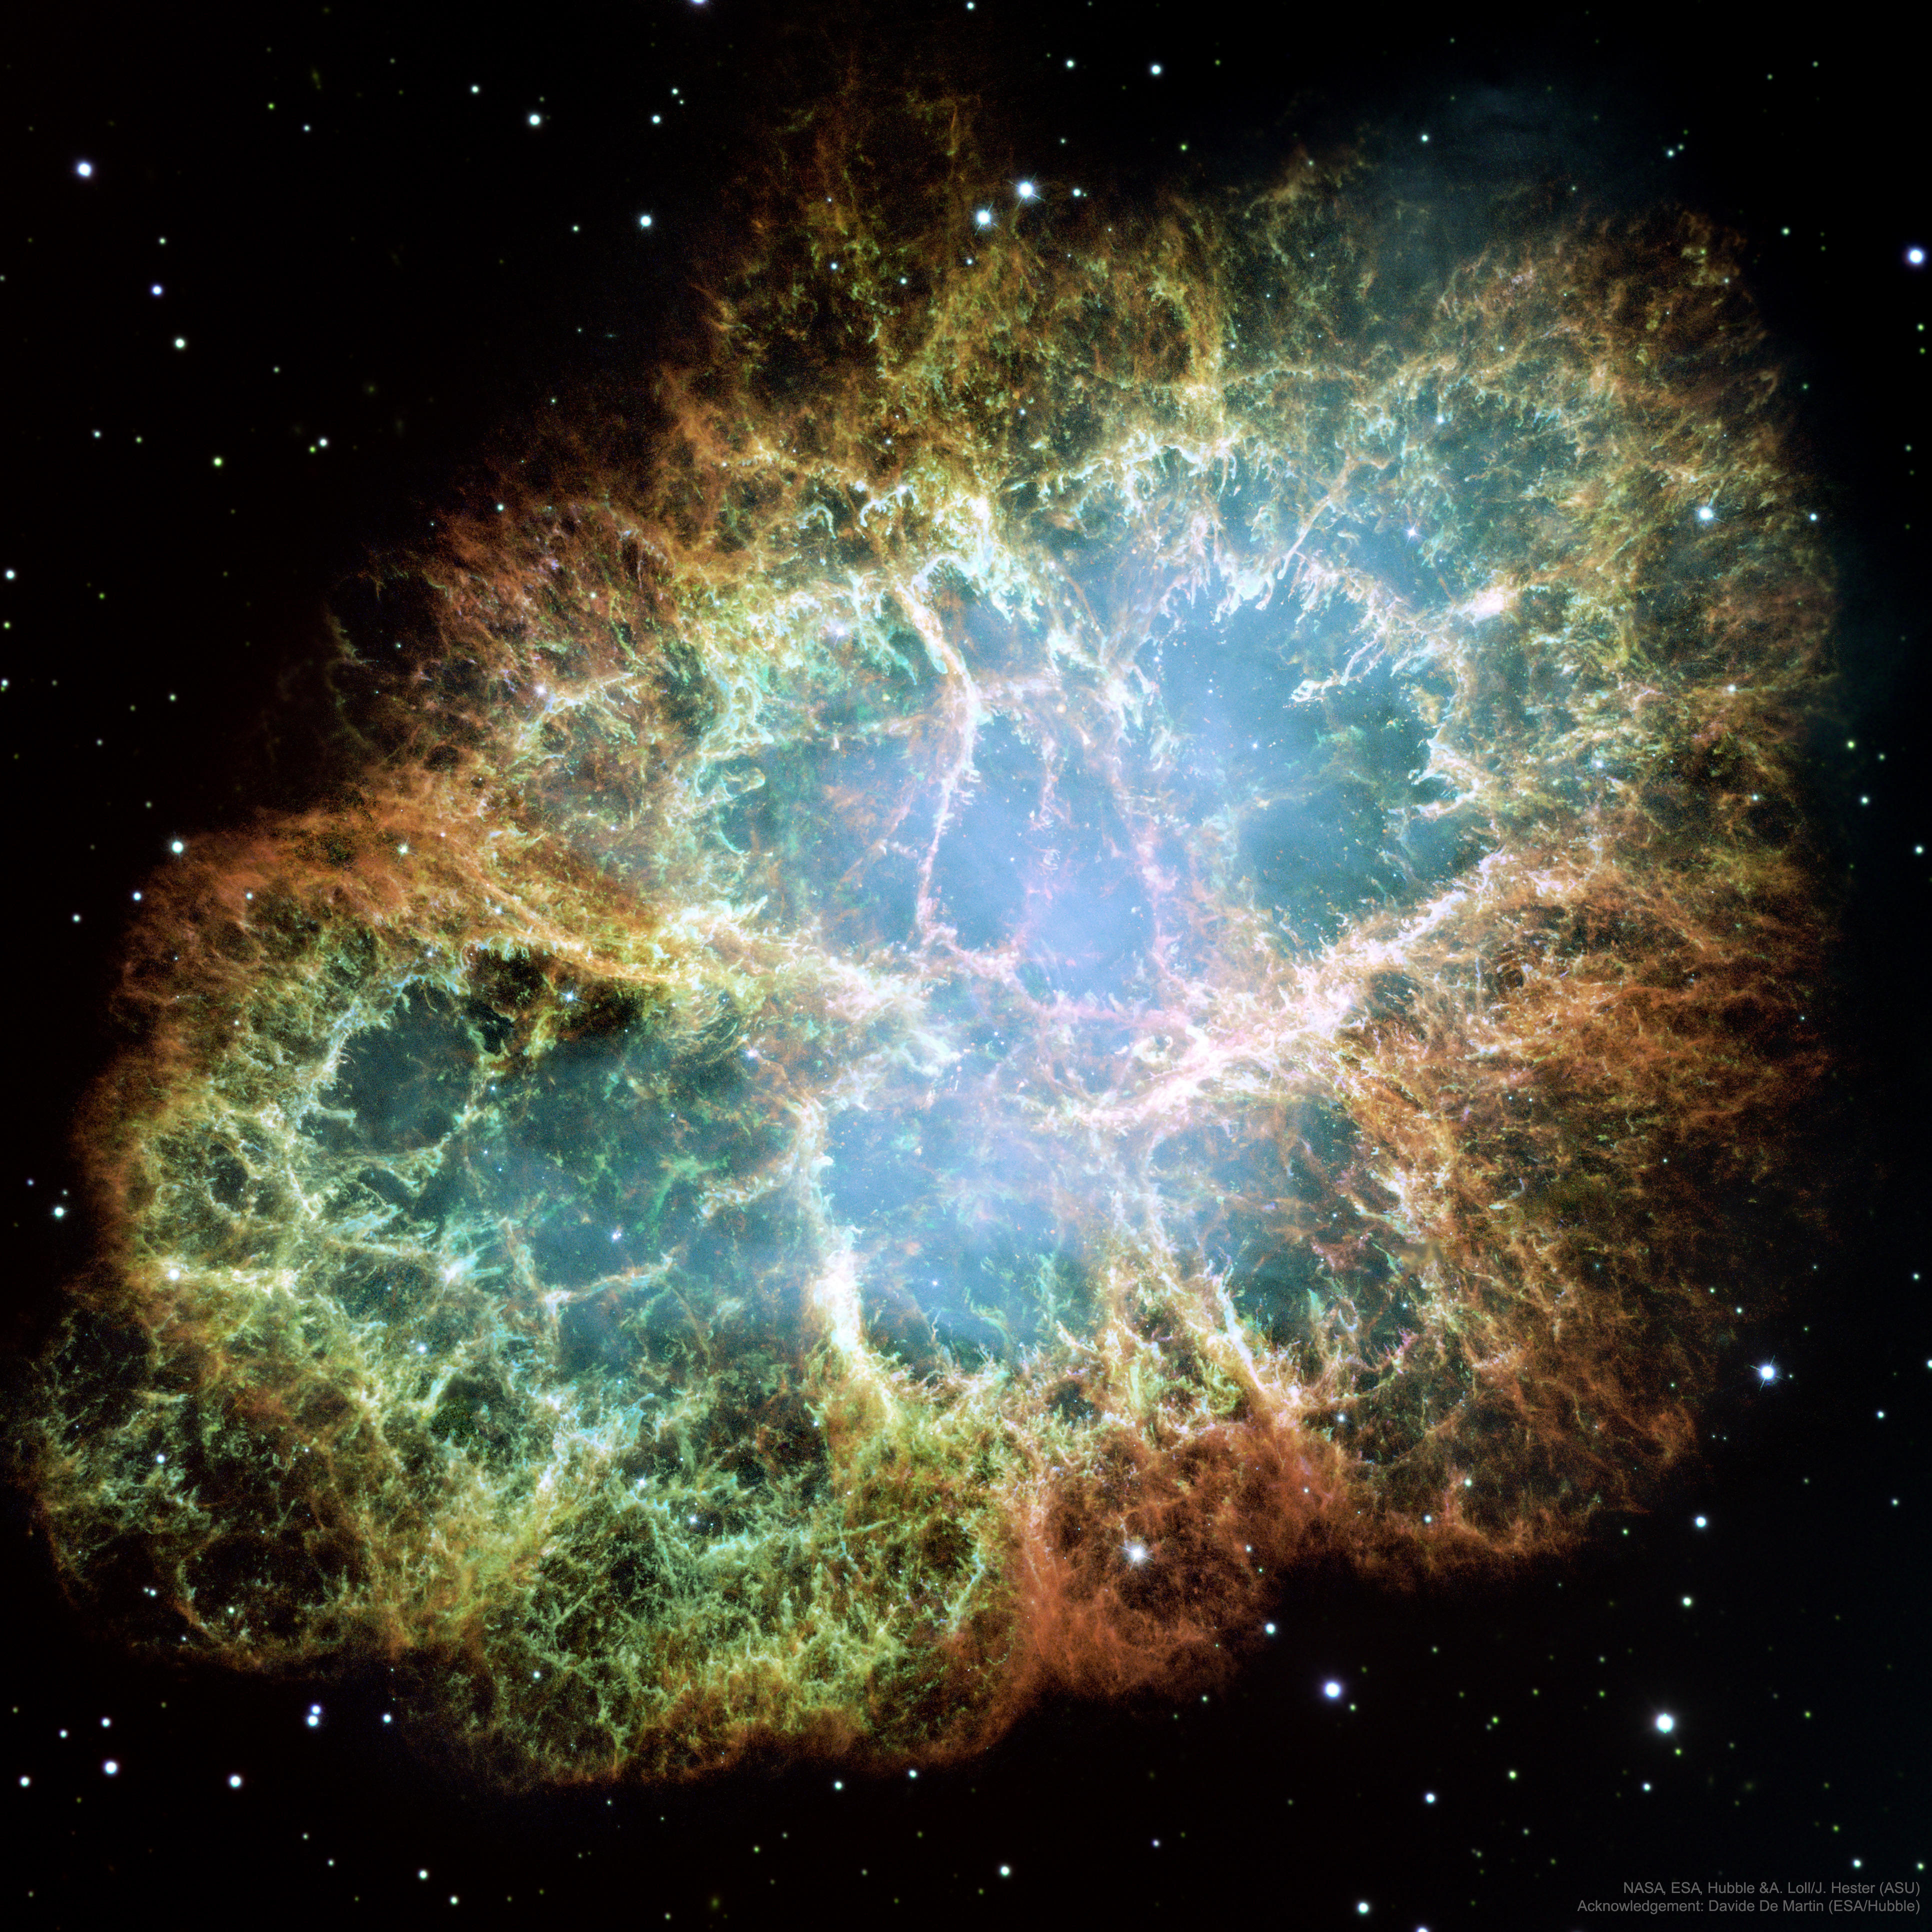 APOD: 2018 September 9 - M1: The Crab Nebula from Hubble